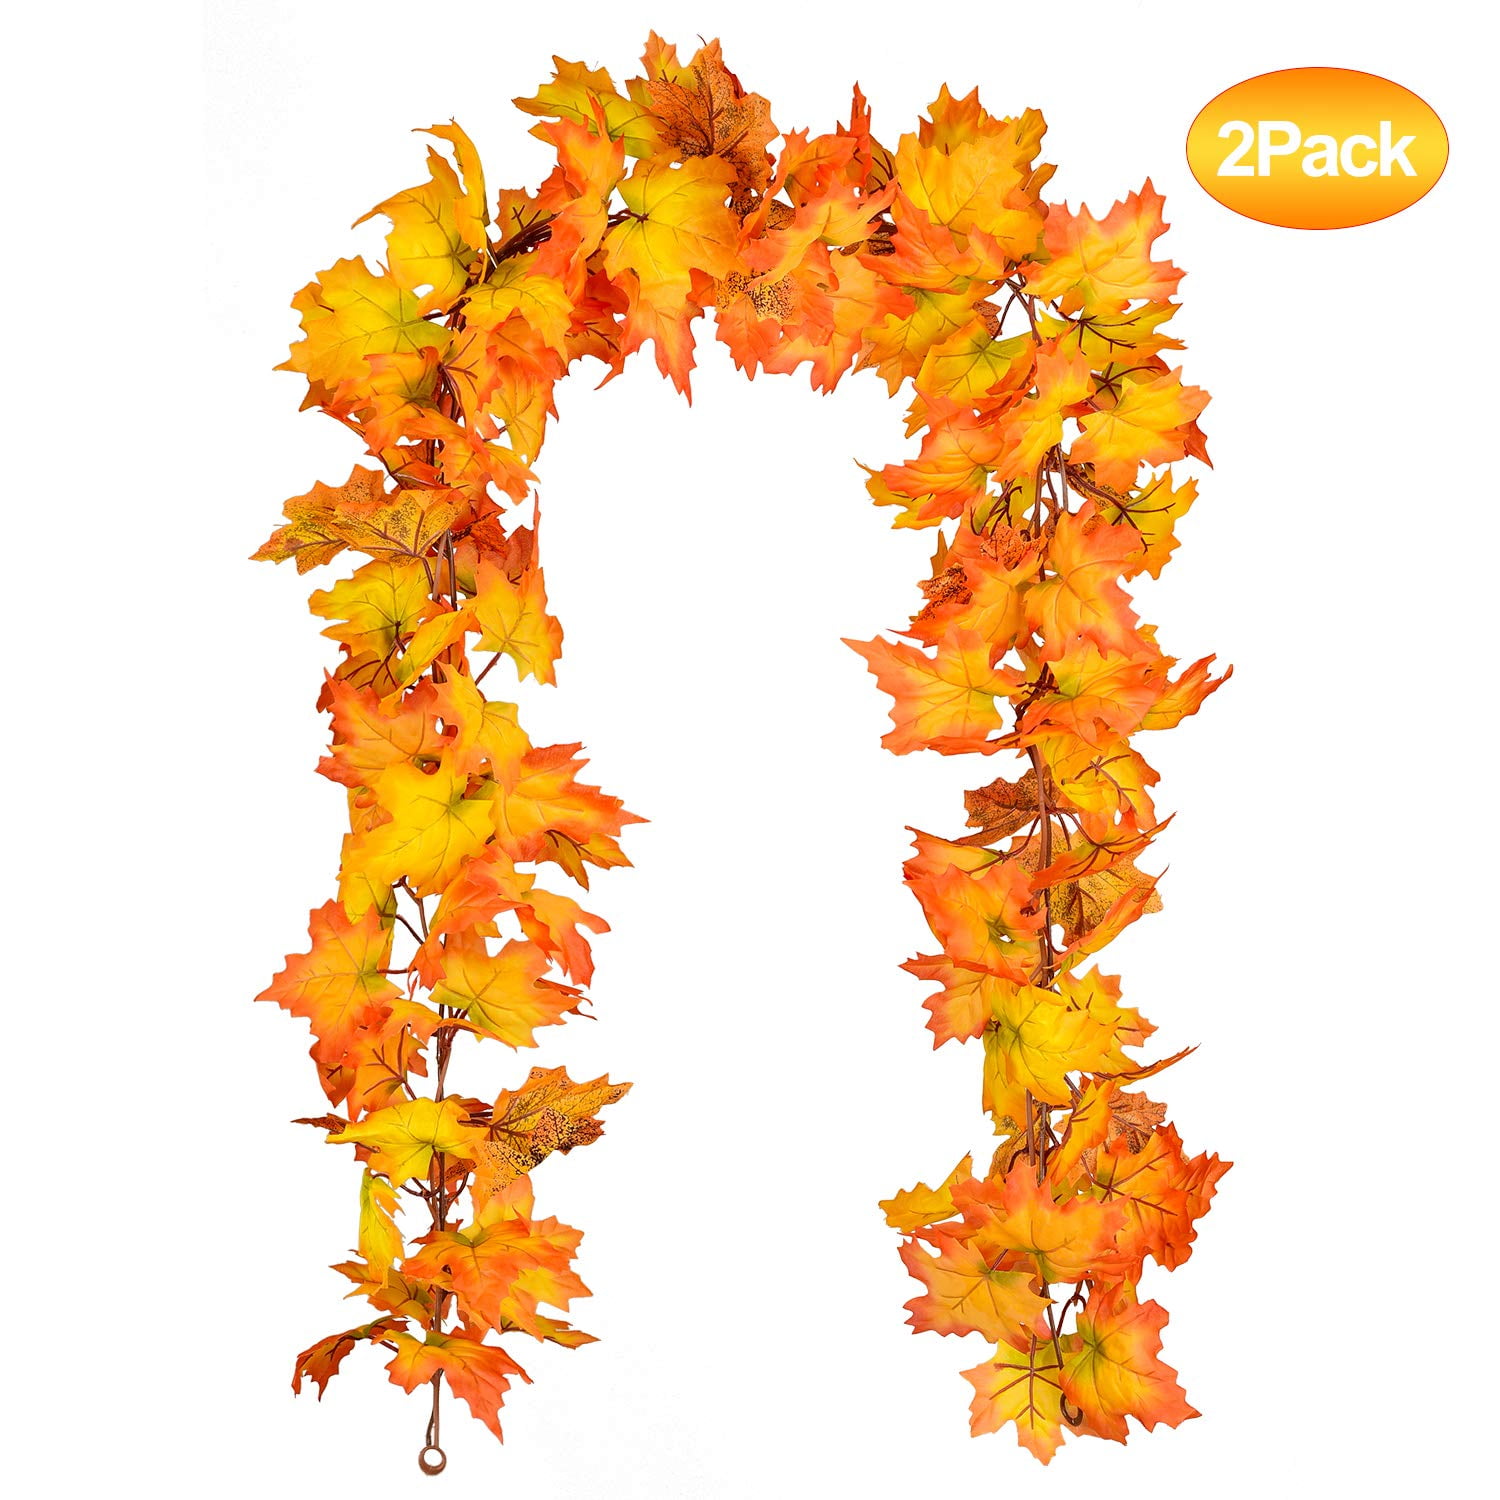 5.5Ft//Piece Hanging Vine Garland Artificial Autumn Foliage Garland Thanksgiving Decor for Home Wedding Fireplace Party Christmas Artiflr 2 Pack Fall Garland Maple Leaf